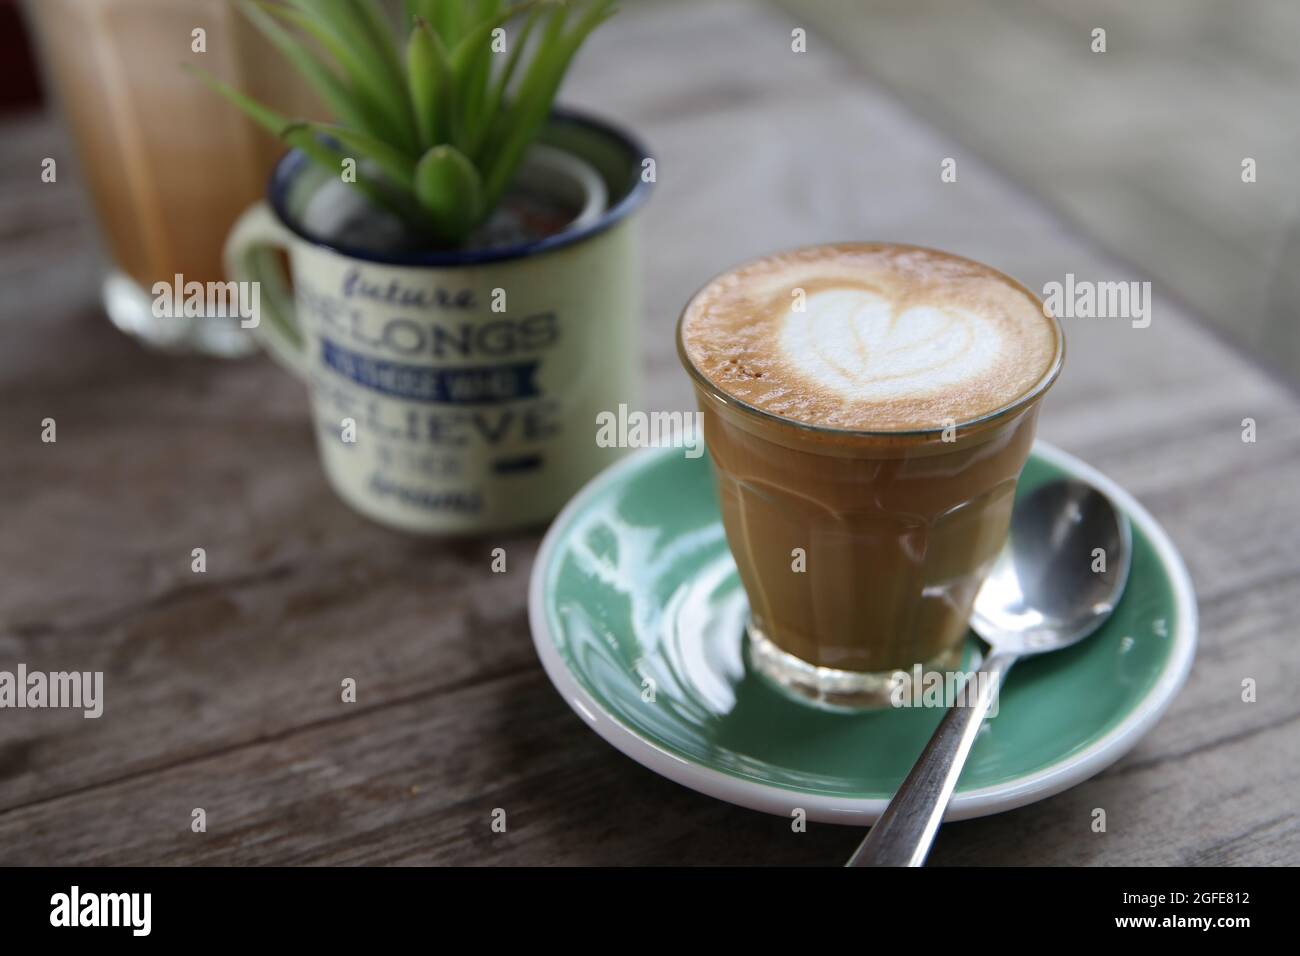 Morning Coffee at coffeeshop. A glass of latte on the table. Stock Photo